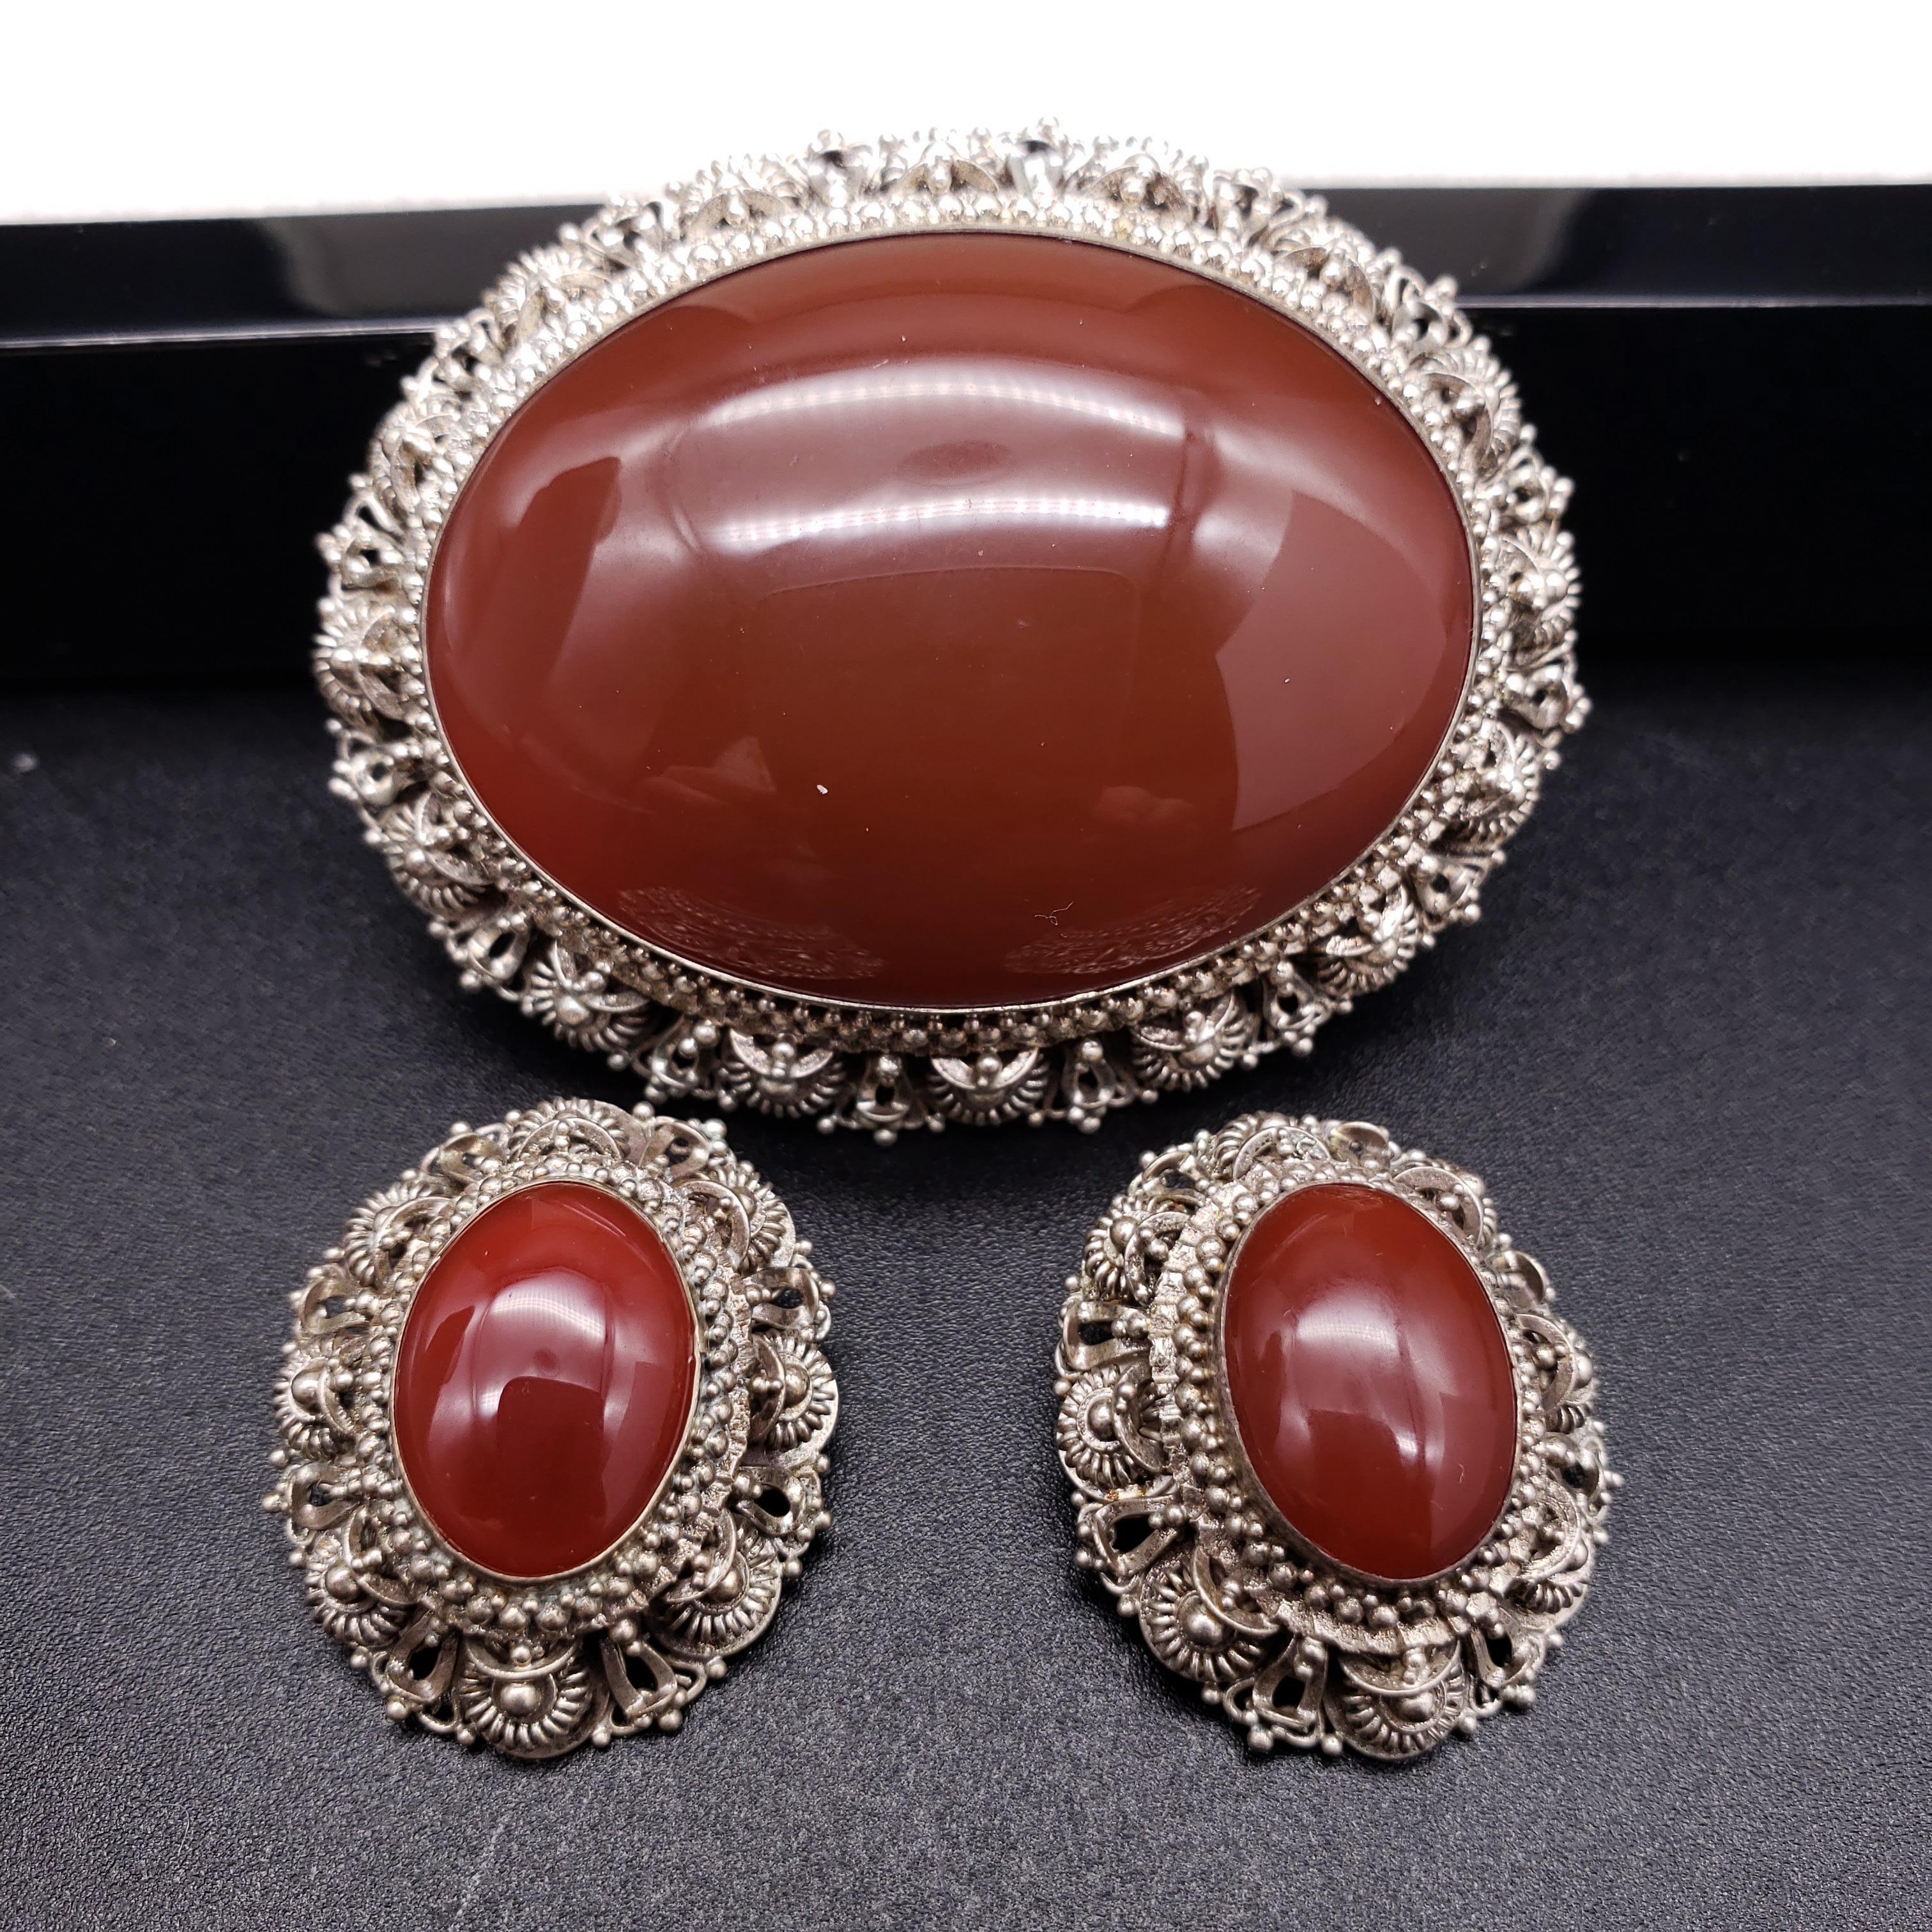 An extravagant set of clip on earrings and a brooch, decorated with carnelian in a sterling silver filigree setting. 
Lavish Victorian set is sure to impress!

From vintage stock in excellent condition

Brooch dimensions: 2 1/4 x 1 3/4